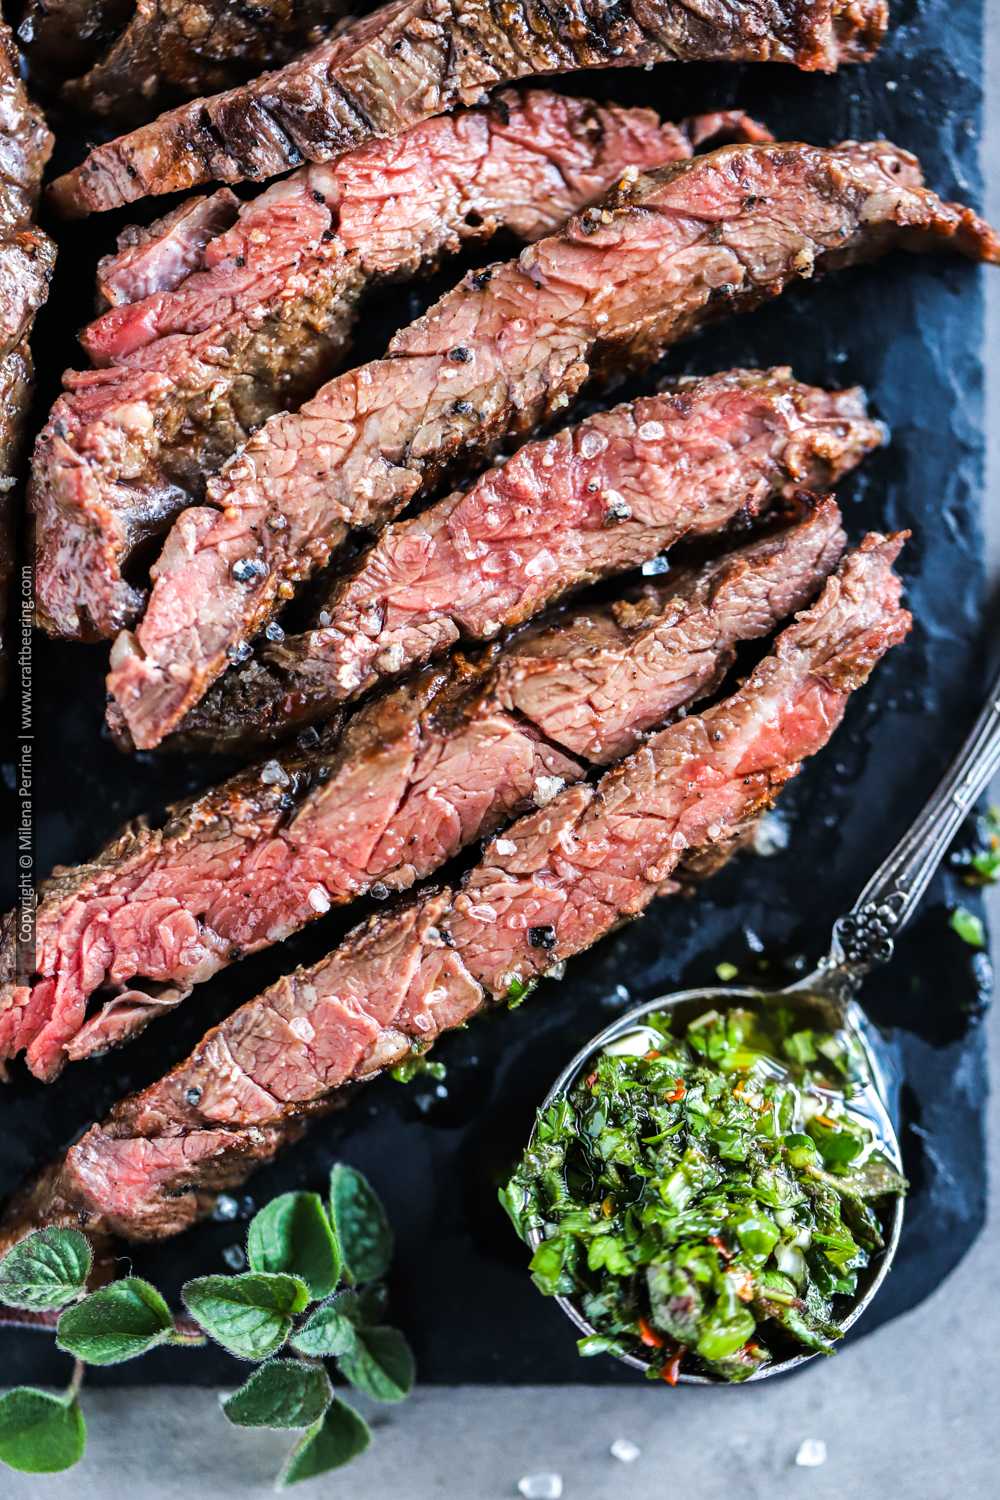 Grilled skirt steak (outside cut) Argentinian style with chimichurri.